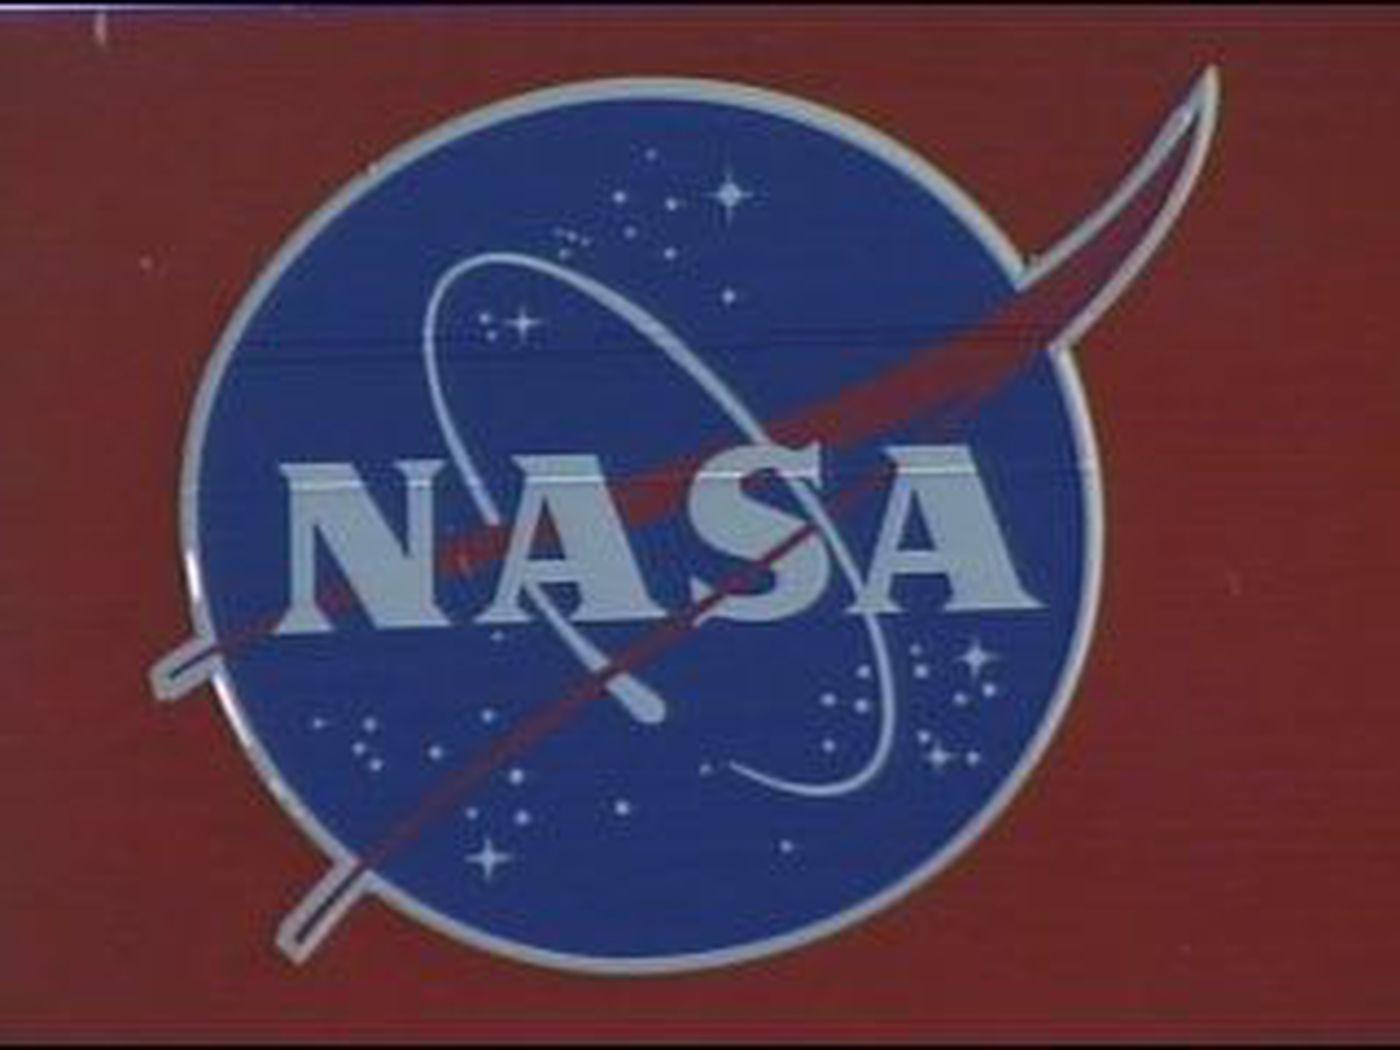 MSFC Logo - NASA holds "Take Your Kid to Work" day at MSFC